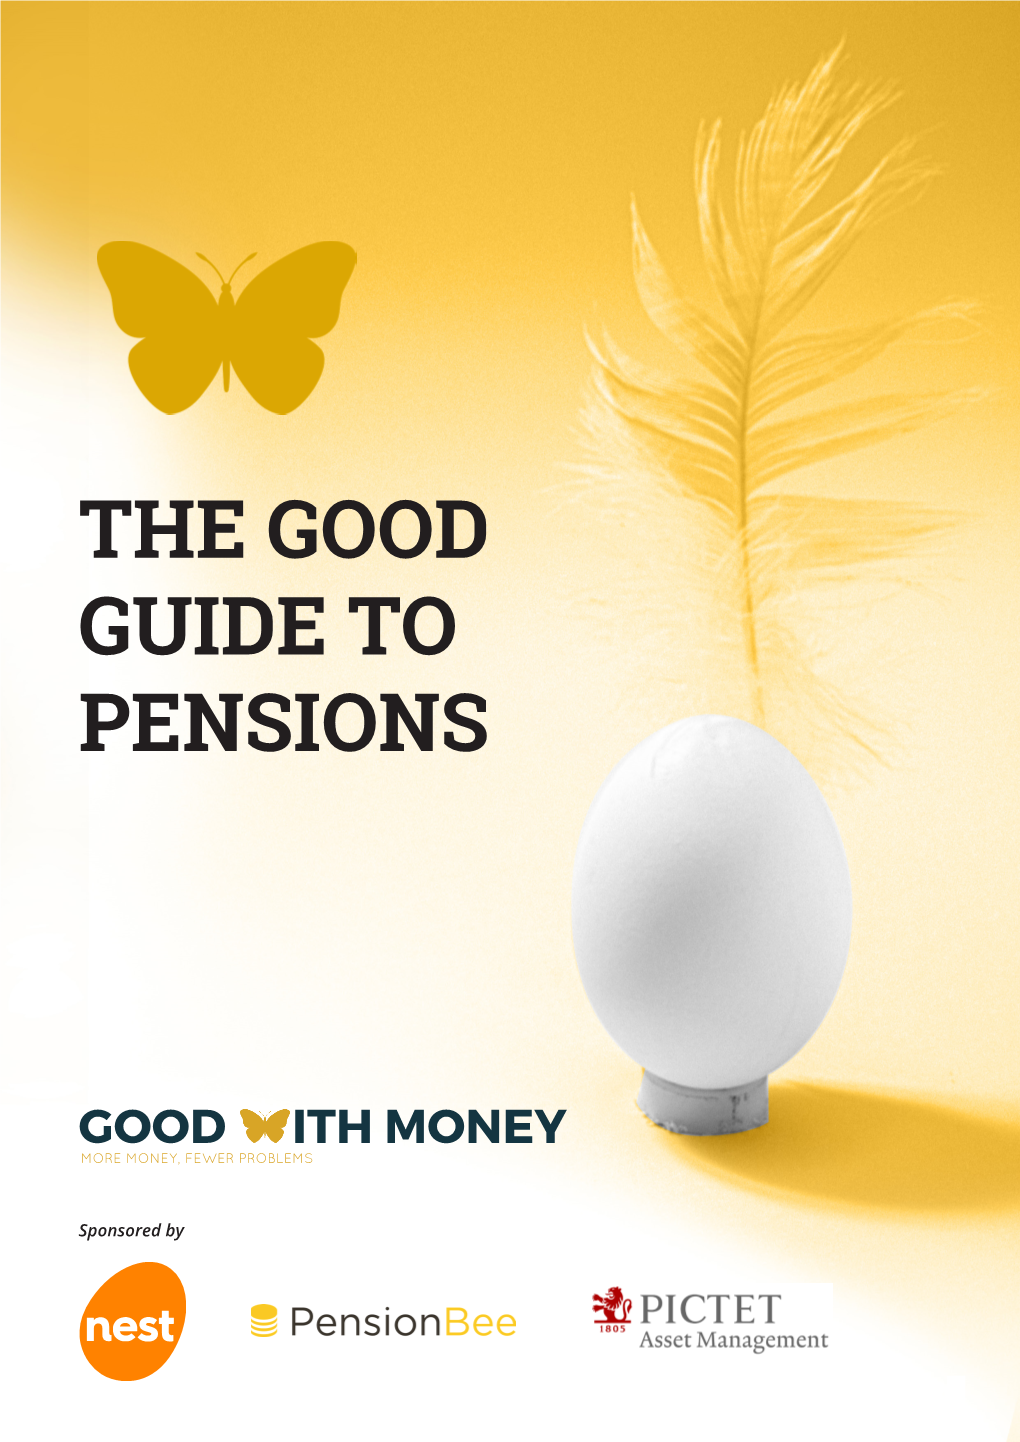 The Good Guide to Pensions